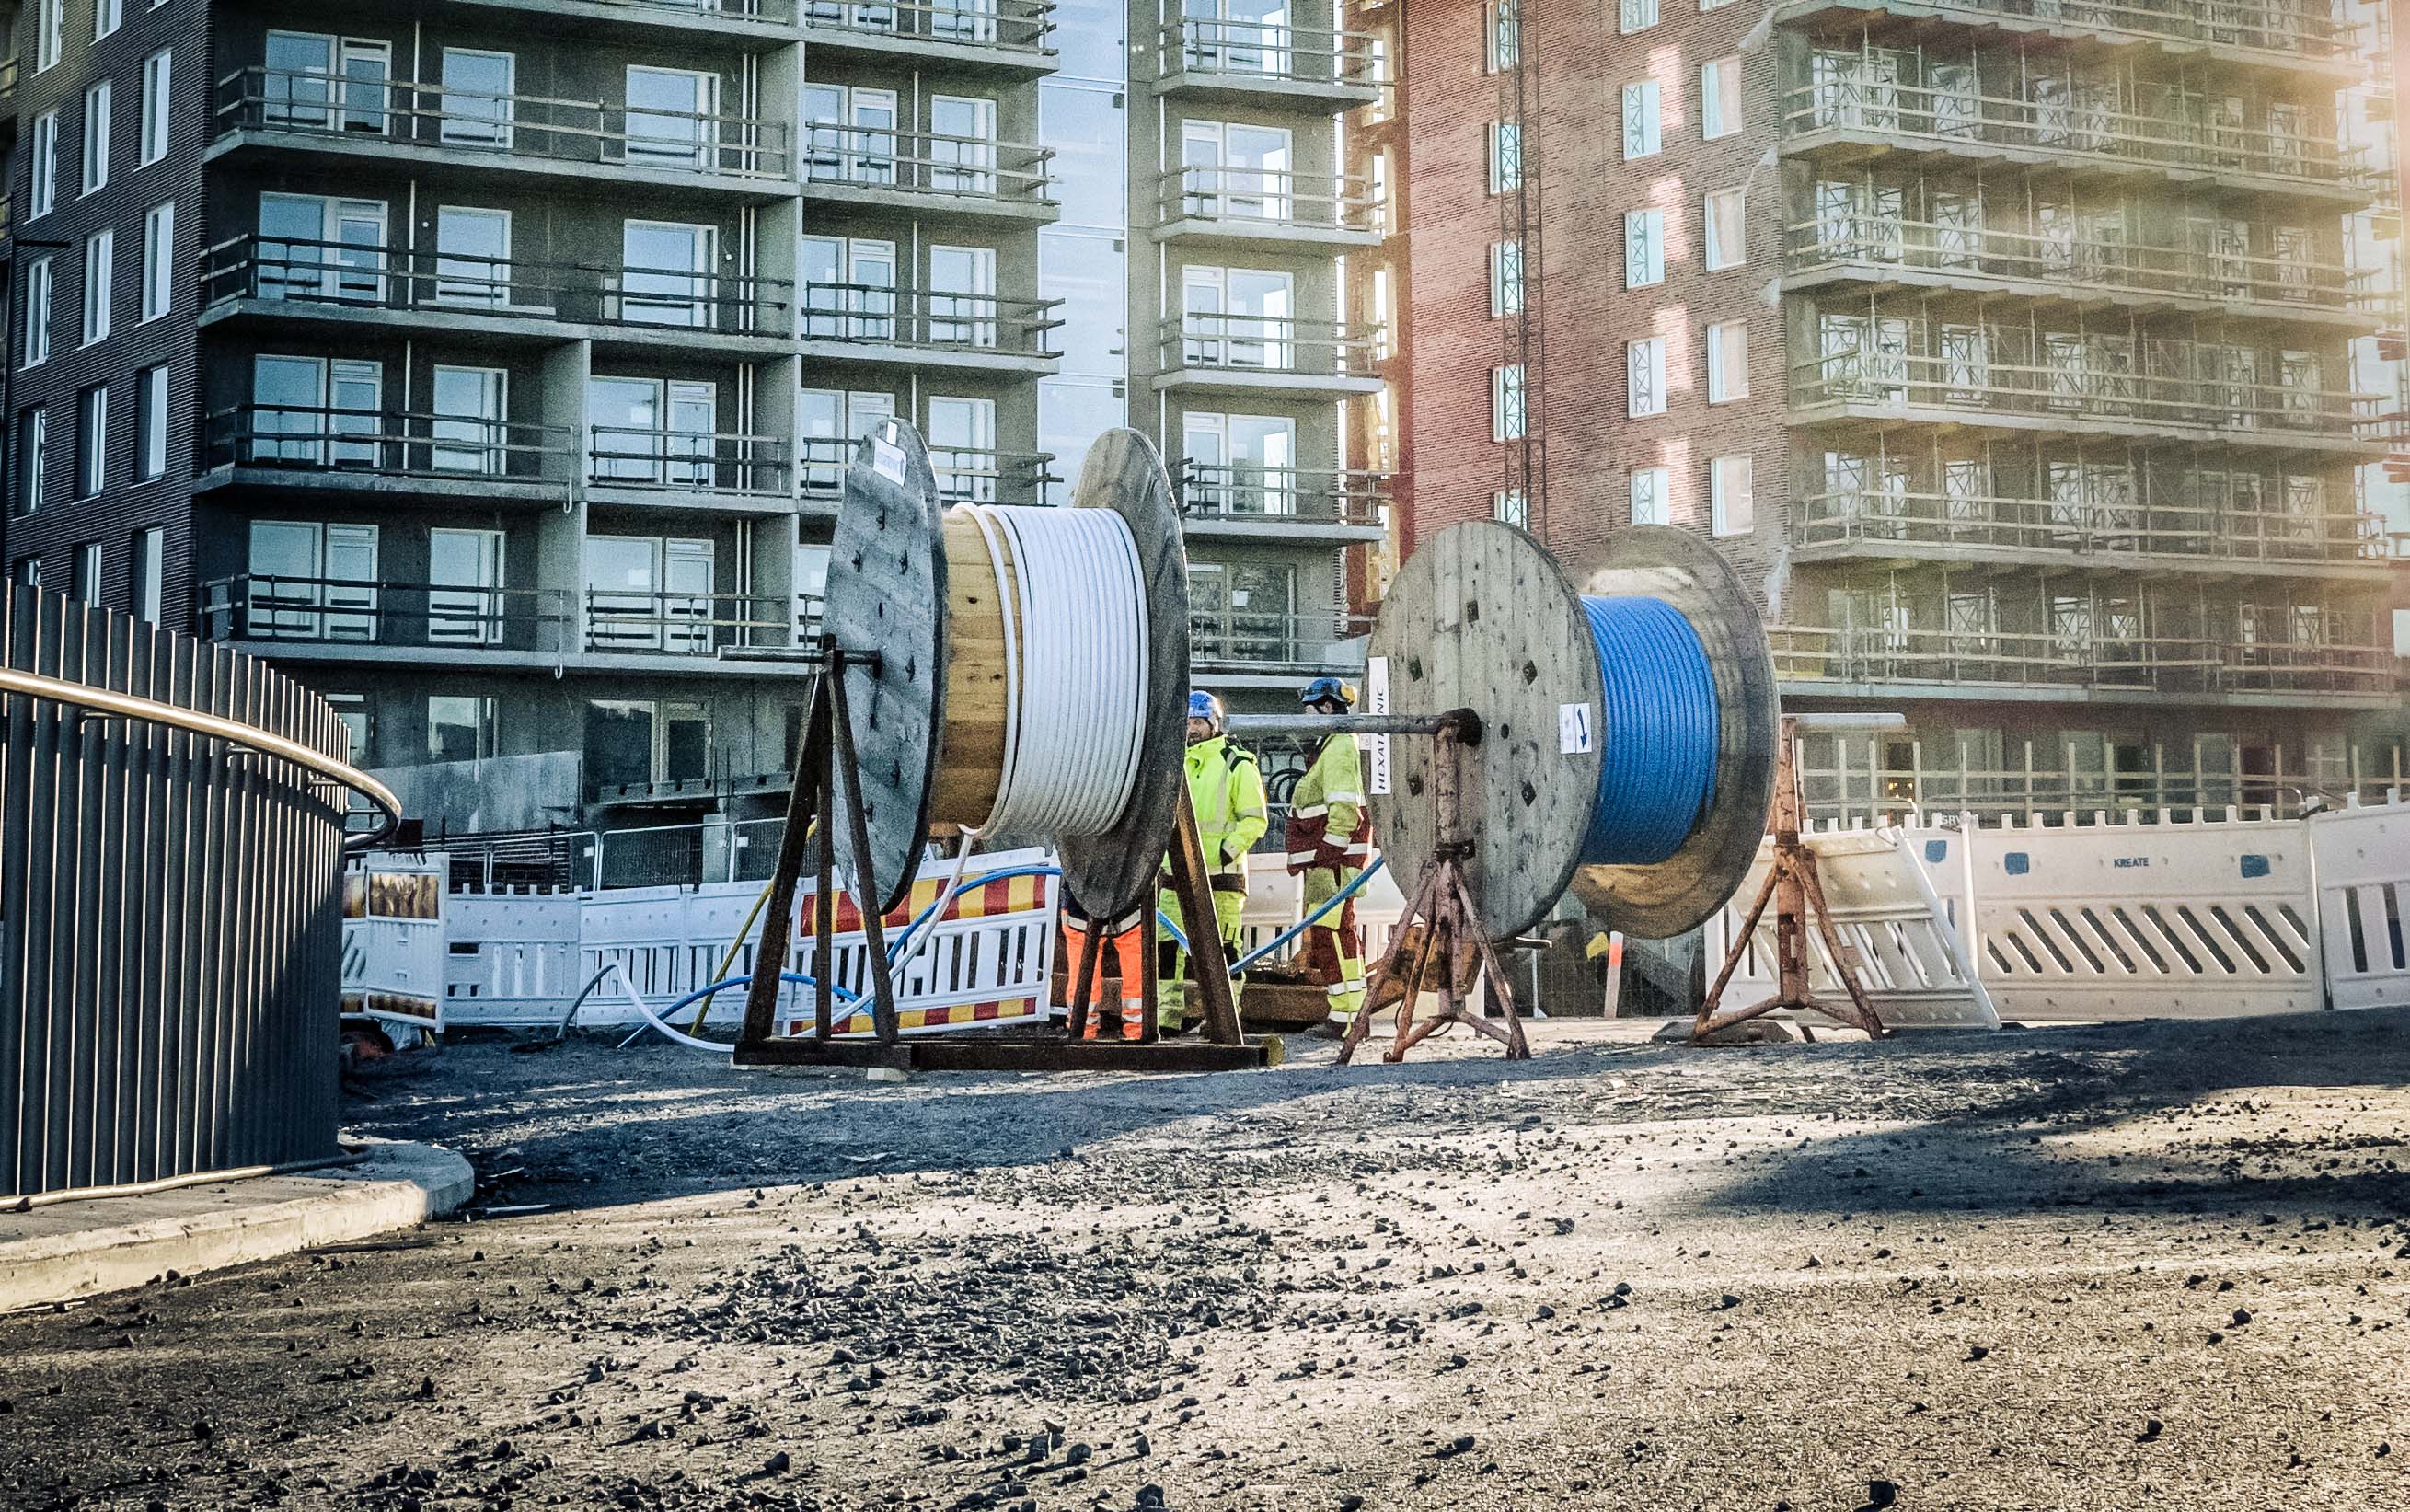 People in safety clothing and protective helmets work on a construction site. In the foreground are large wooden drums with microduct.